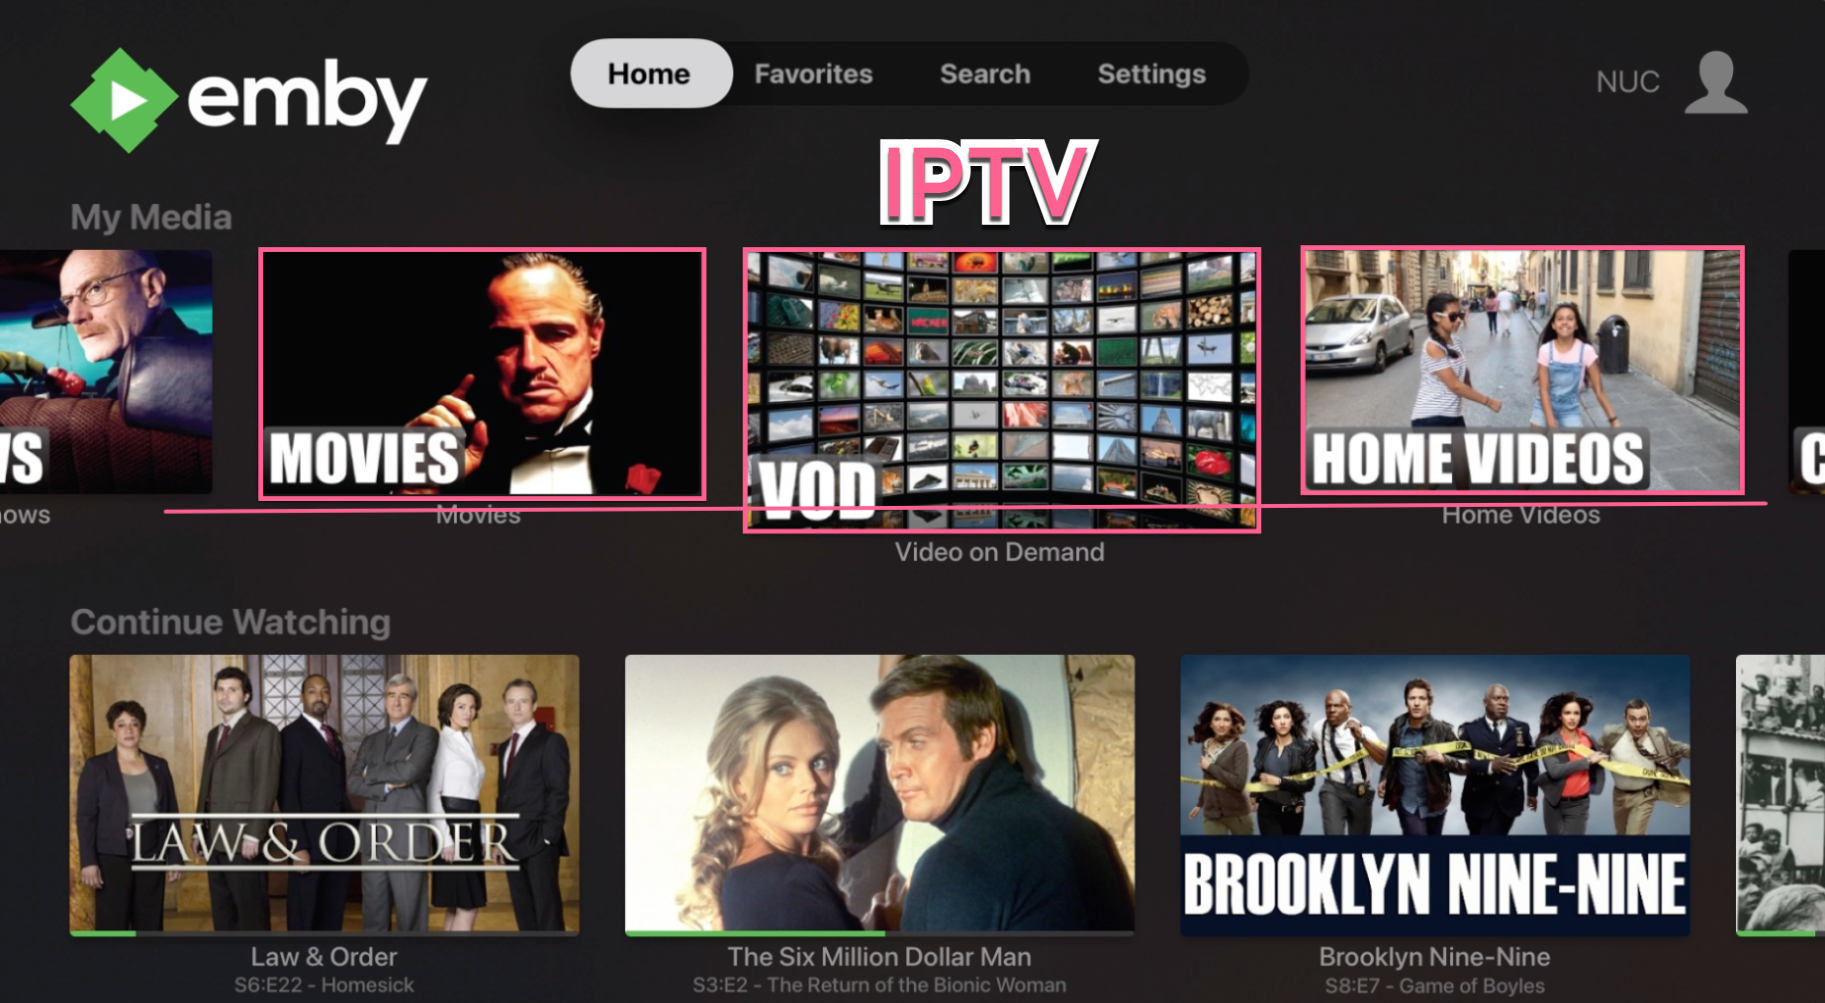 IPTV icon larger than other media in top row of home screen - Apple TV